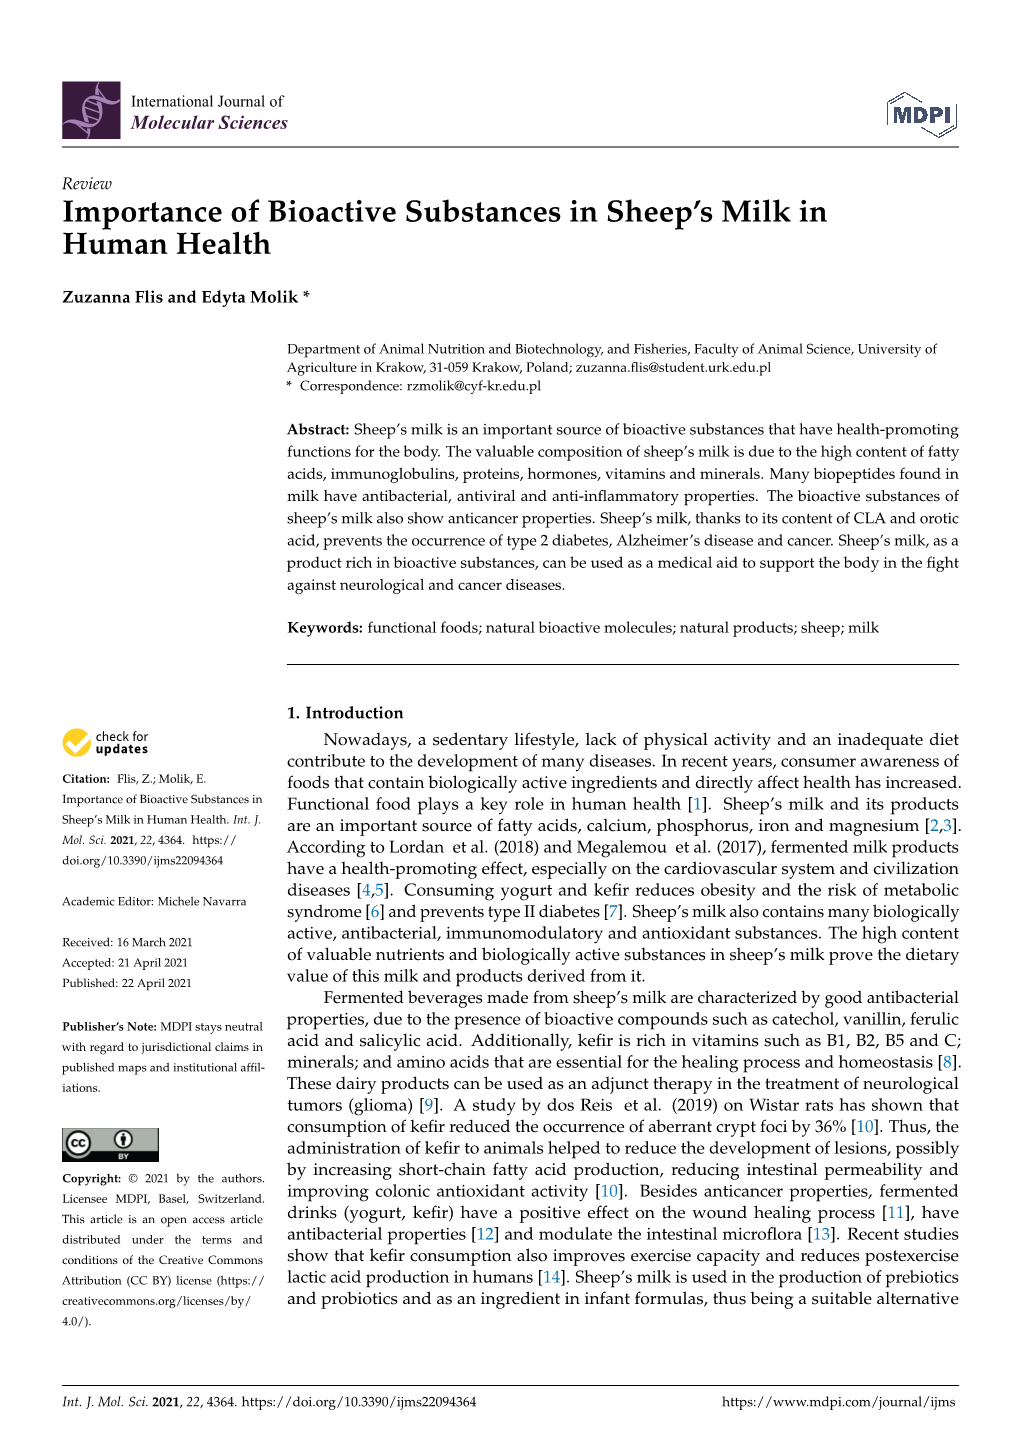 Importance of Bioactive Substances in Sheep's Milk in Human Health